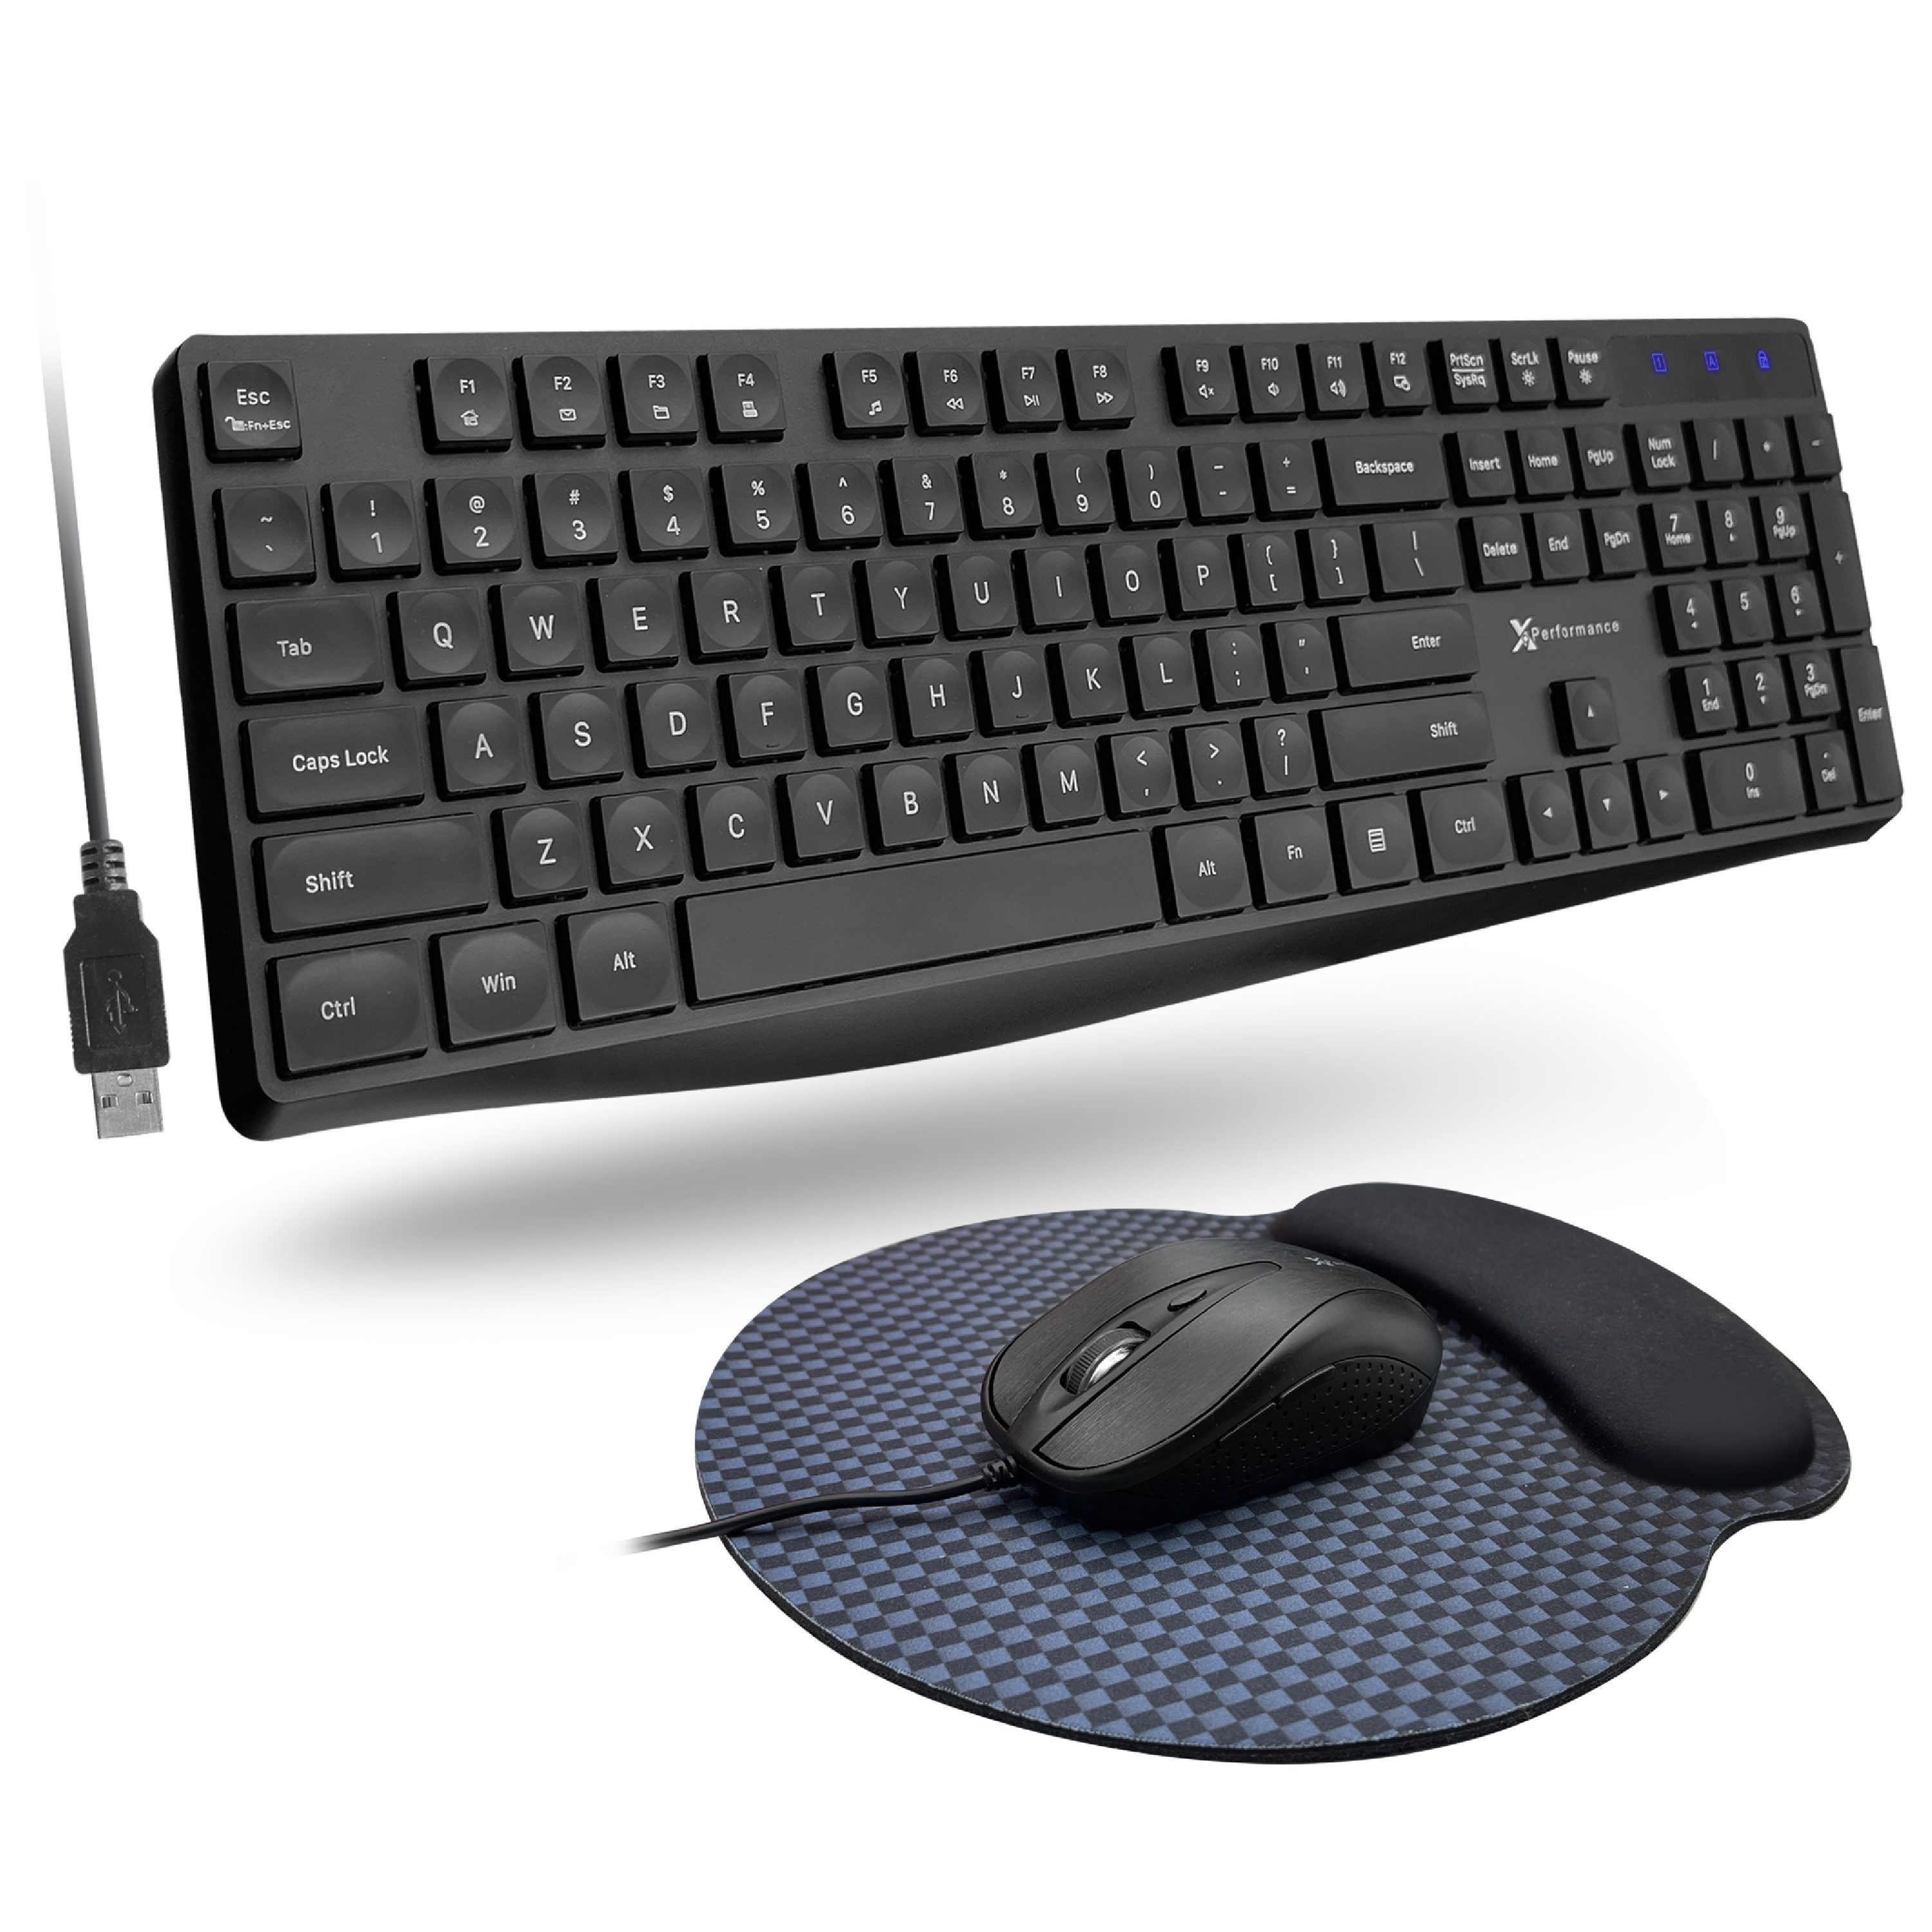 Black Designed for Windows PC with USB Port Macally USB Wireless Keyboard and Mouse Combo 2.4Ghz Full Size Cordless Keyboard and DPI Optical Mouse Simple Plug & Play Mouse and Keyboard Combo - 